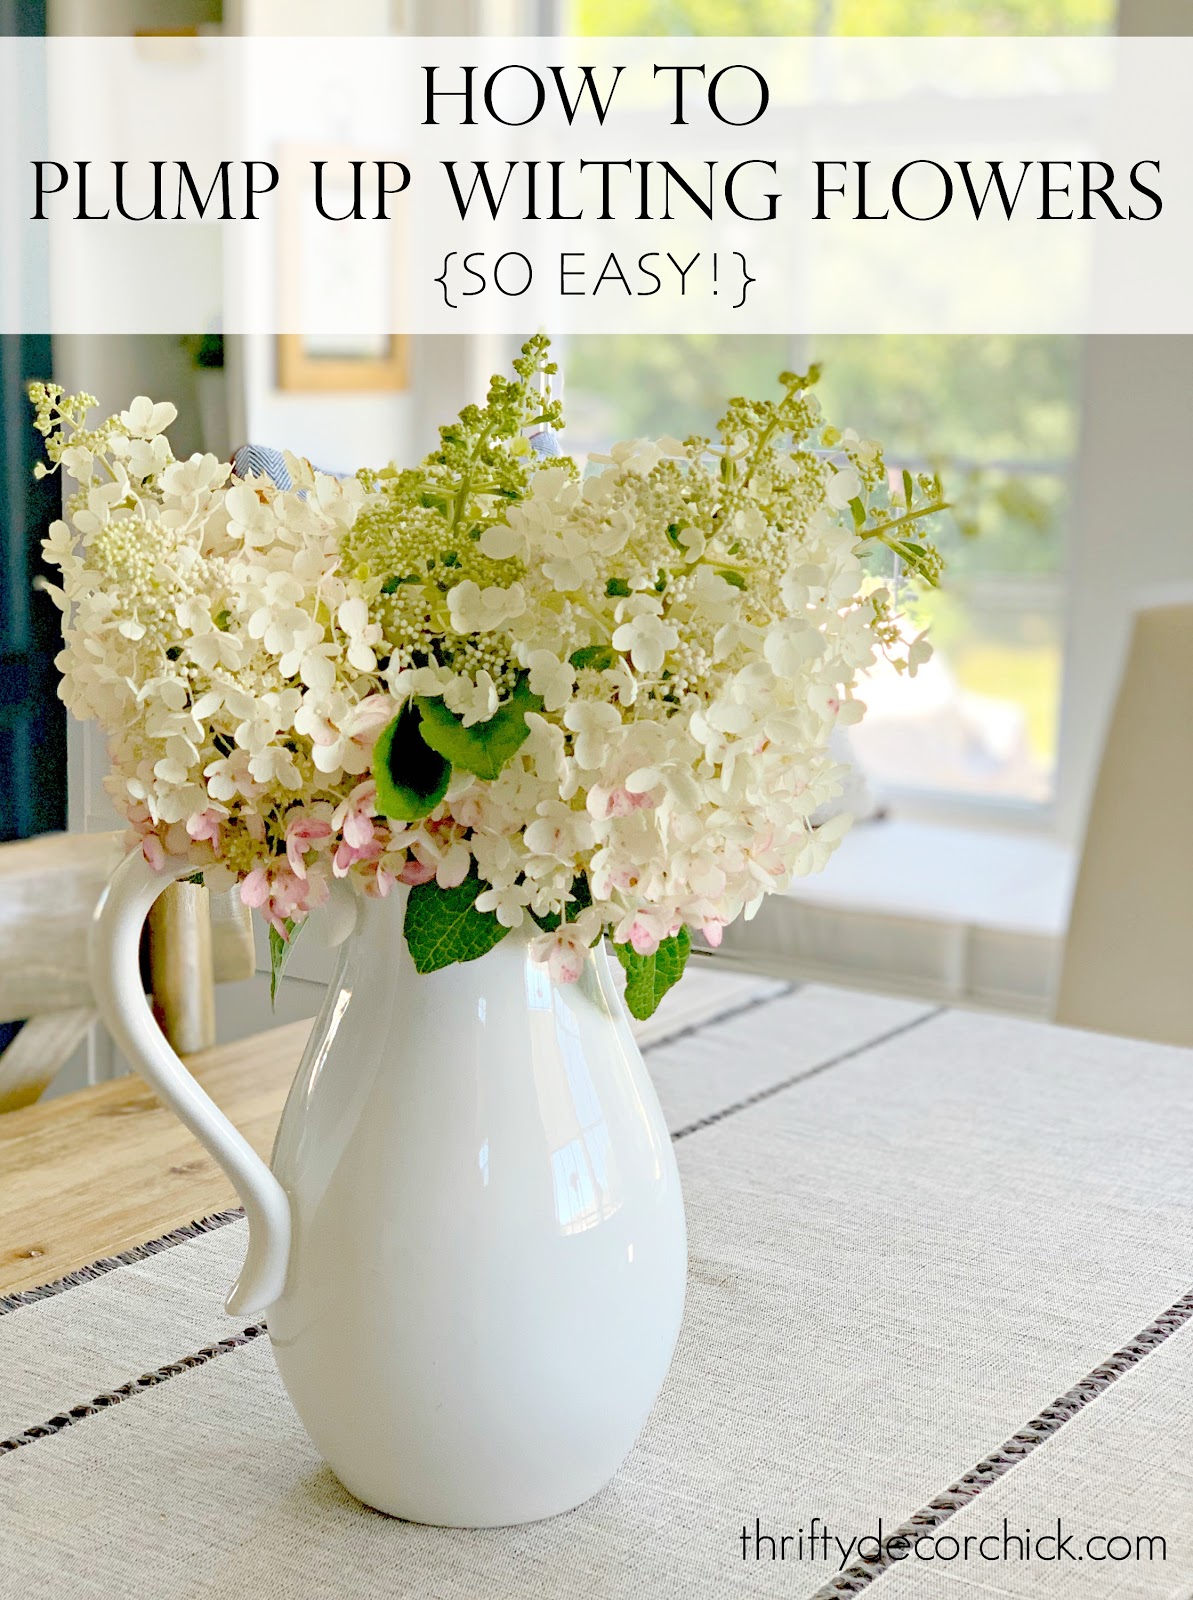 How to Keep Cut Hydrangeas from Wilting - Simple Florist's Trick